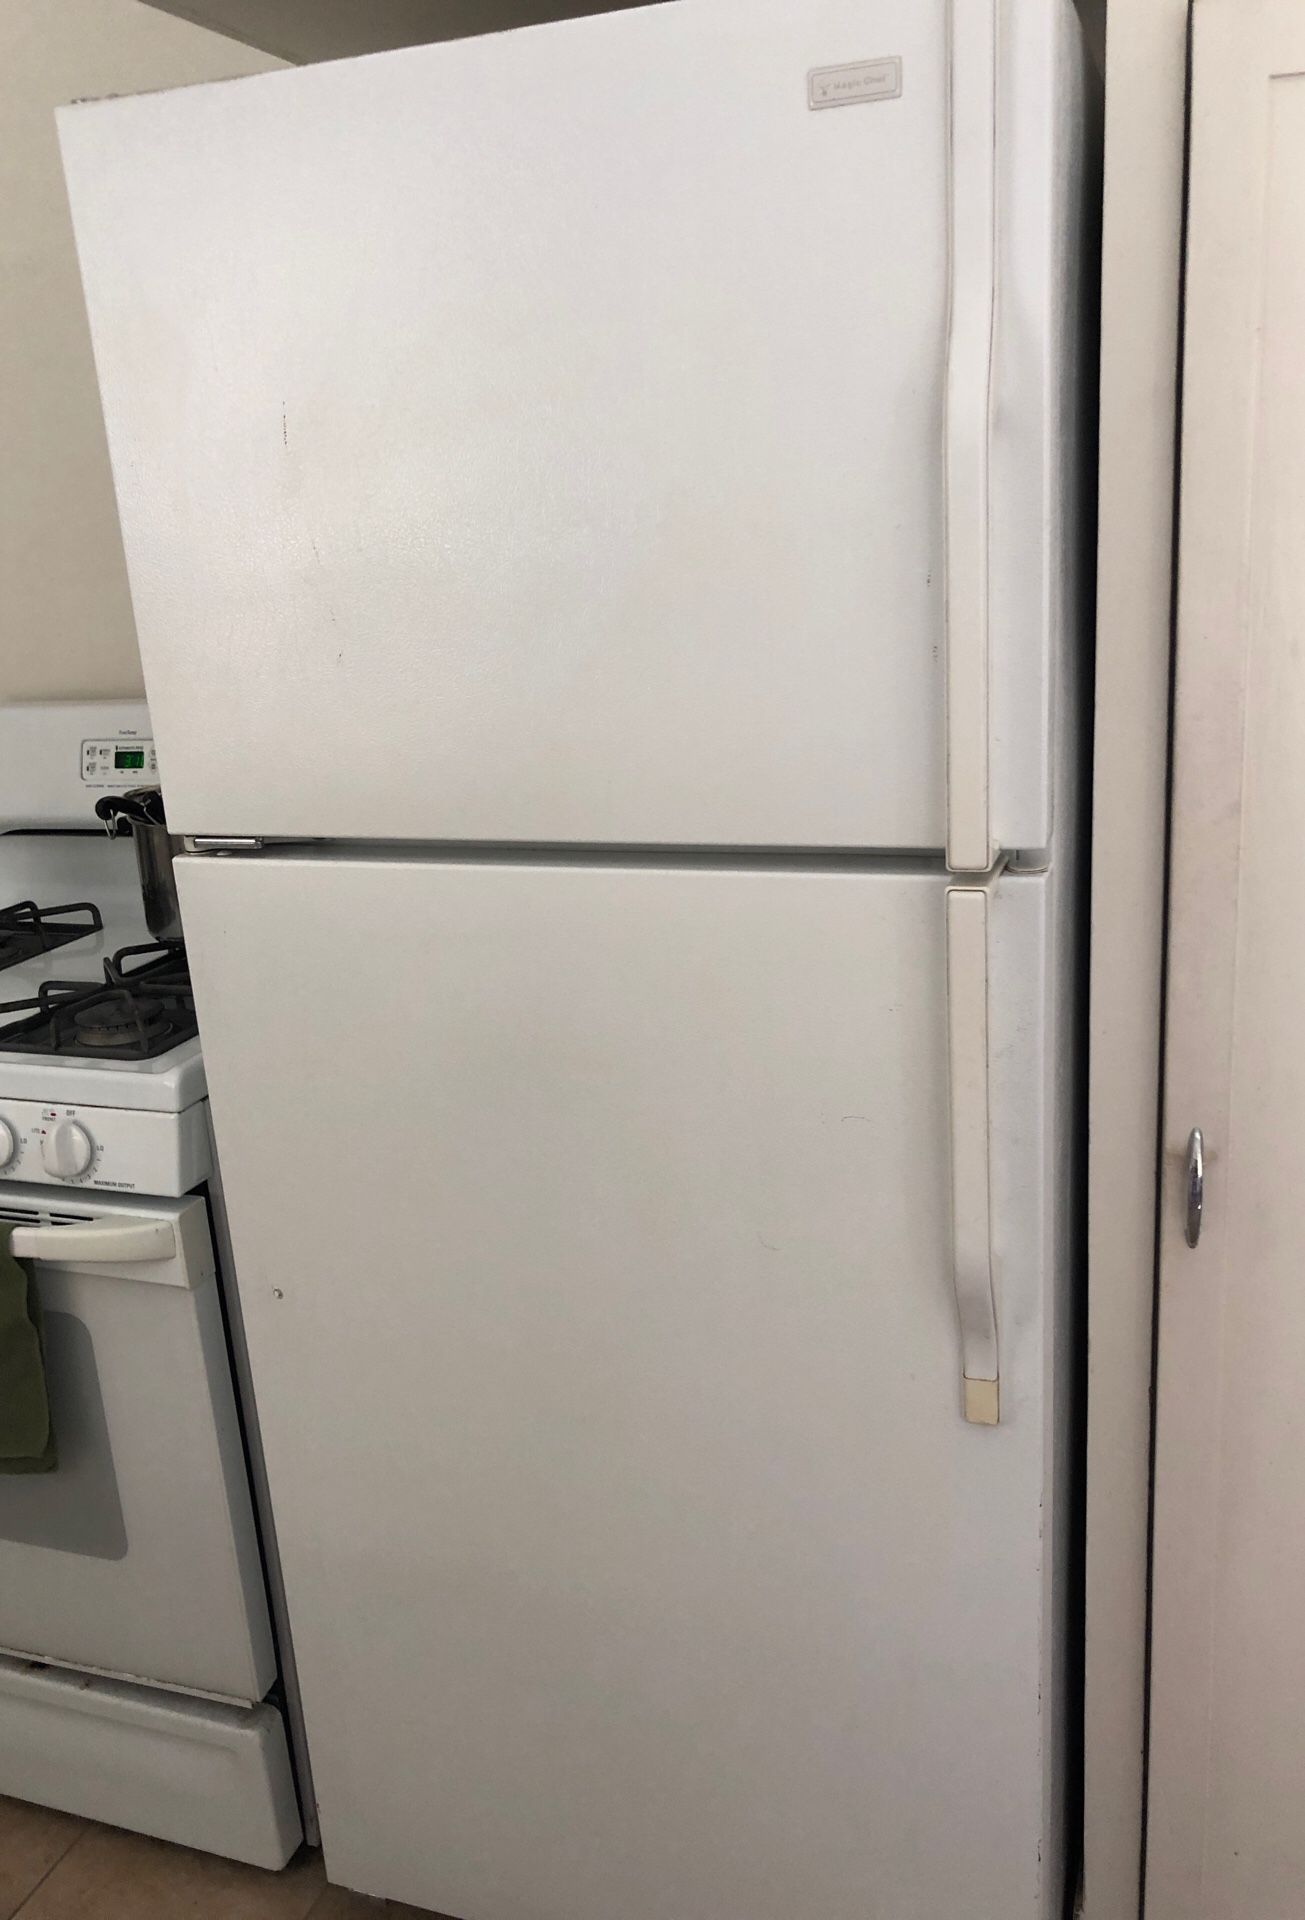 Free refrigerator must bring additional help and dolly to move downstairs